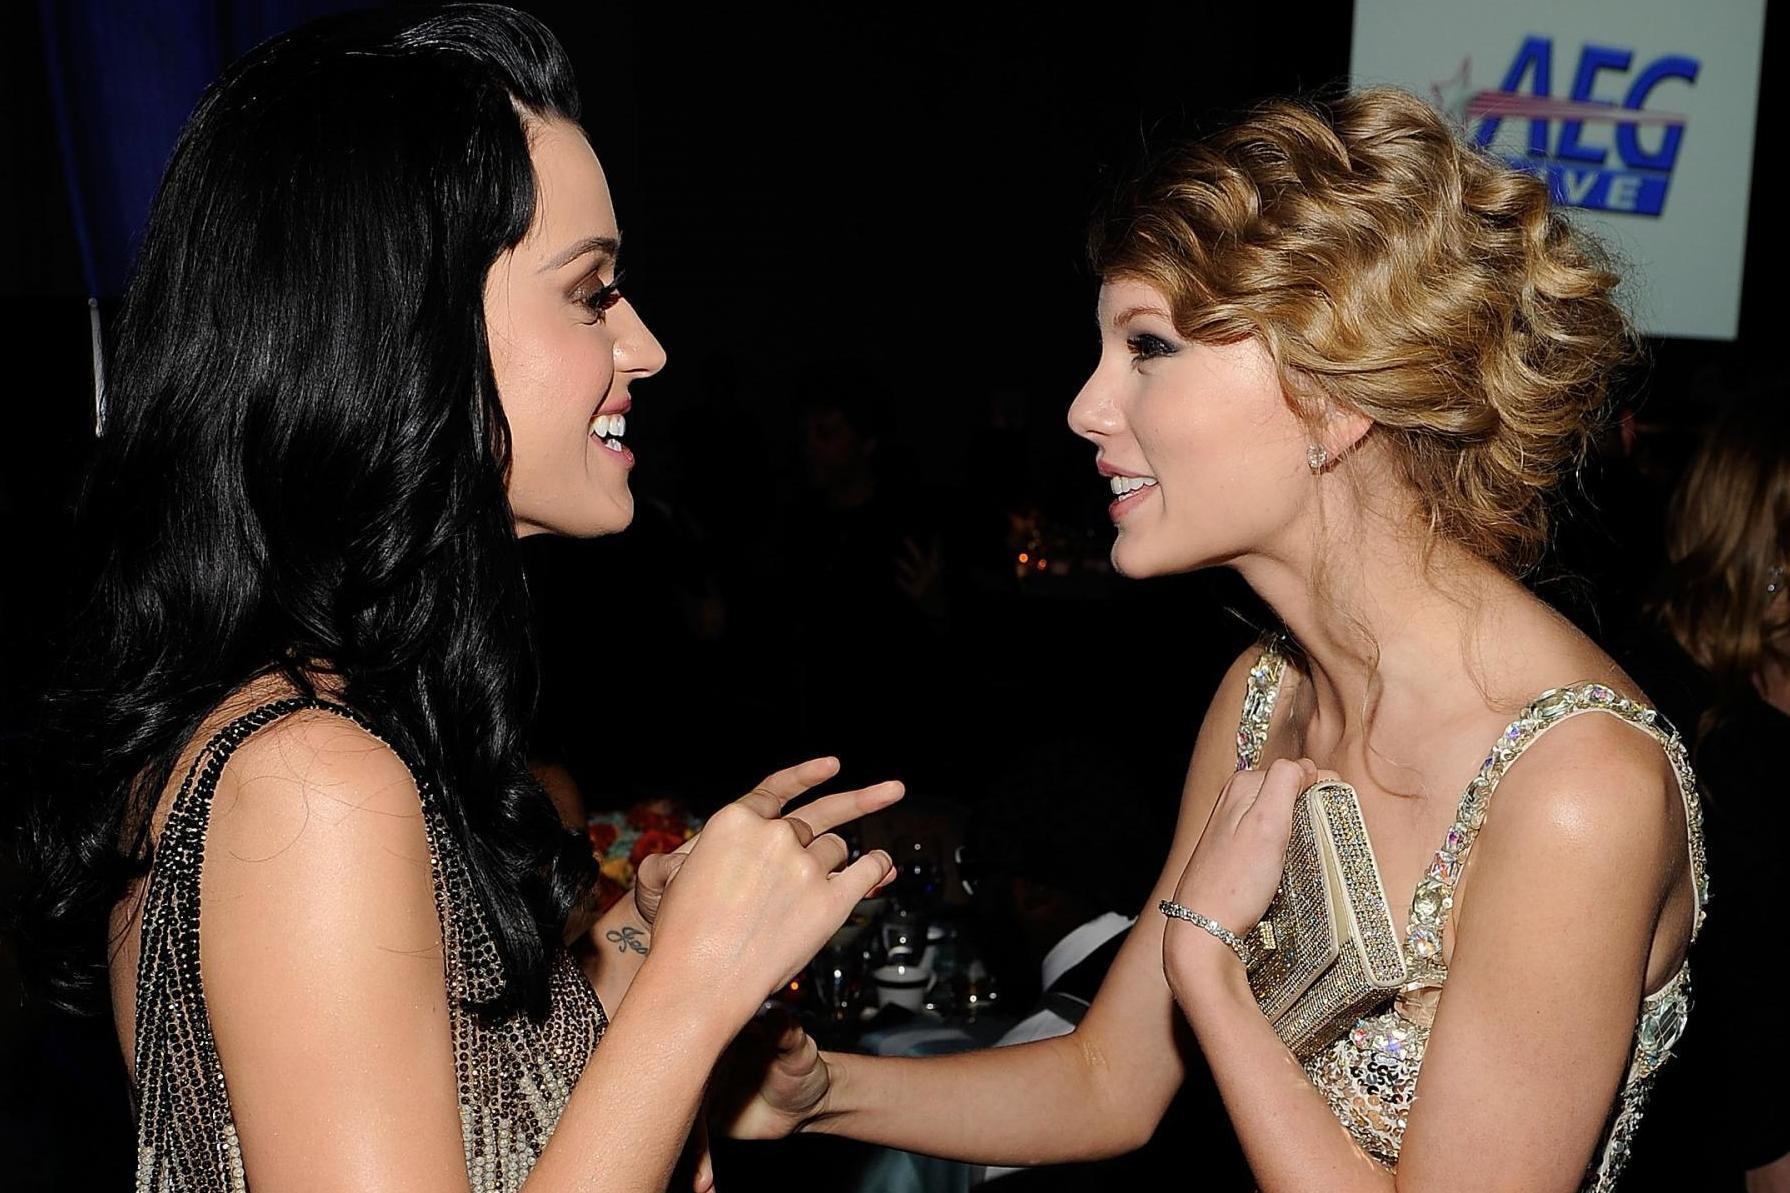 Musicians Kary Perry and Taylor Swift during the 52nd Annual GRAMMY Awards - Salute To Icons Honoring Doug Morris held at The Beverly Hilton Hotel on January 30, 2010 in Beverly Hills, California. Credit: Larry Busacca/Getty Images for NARAS.